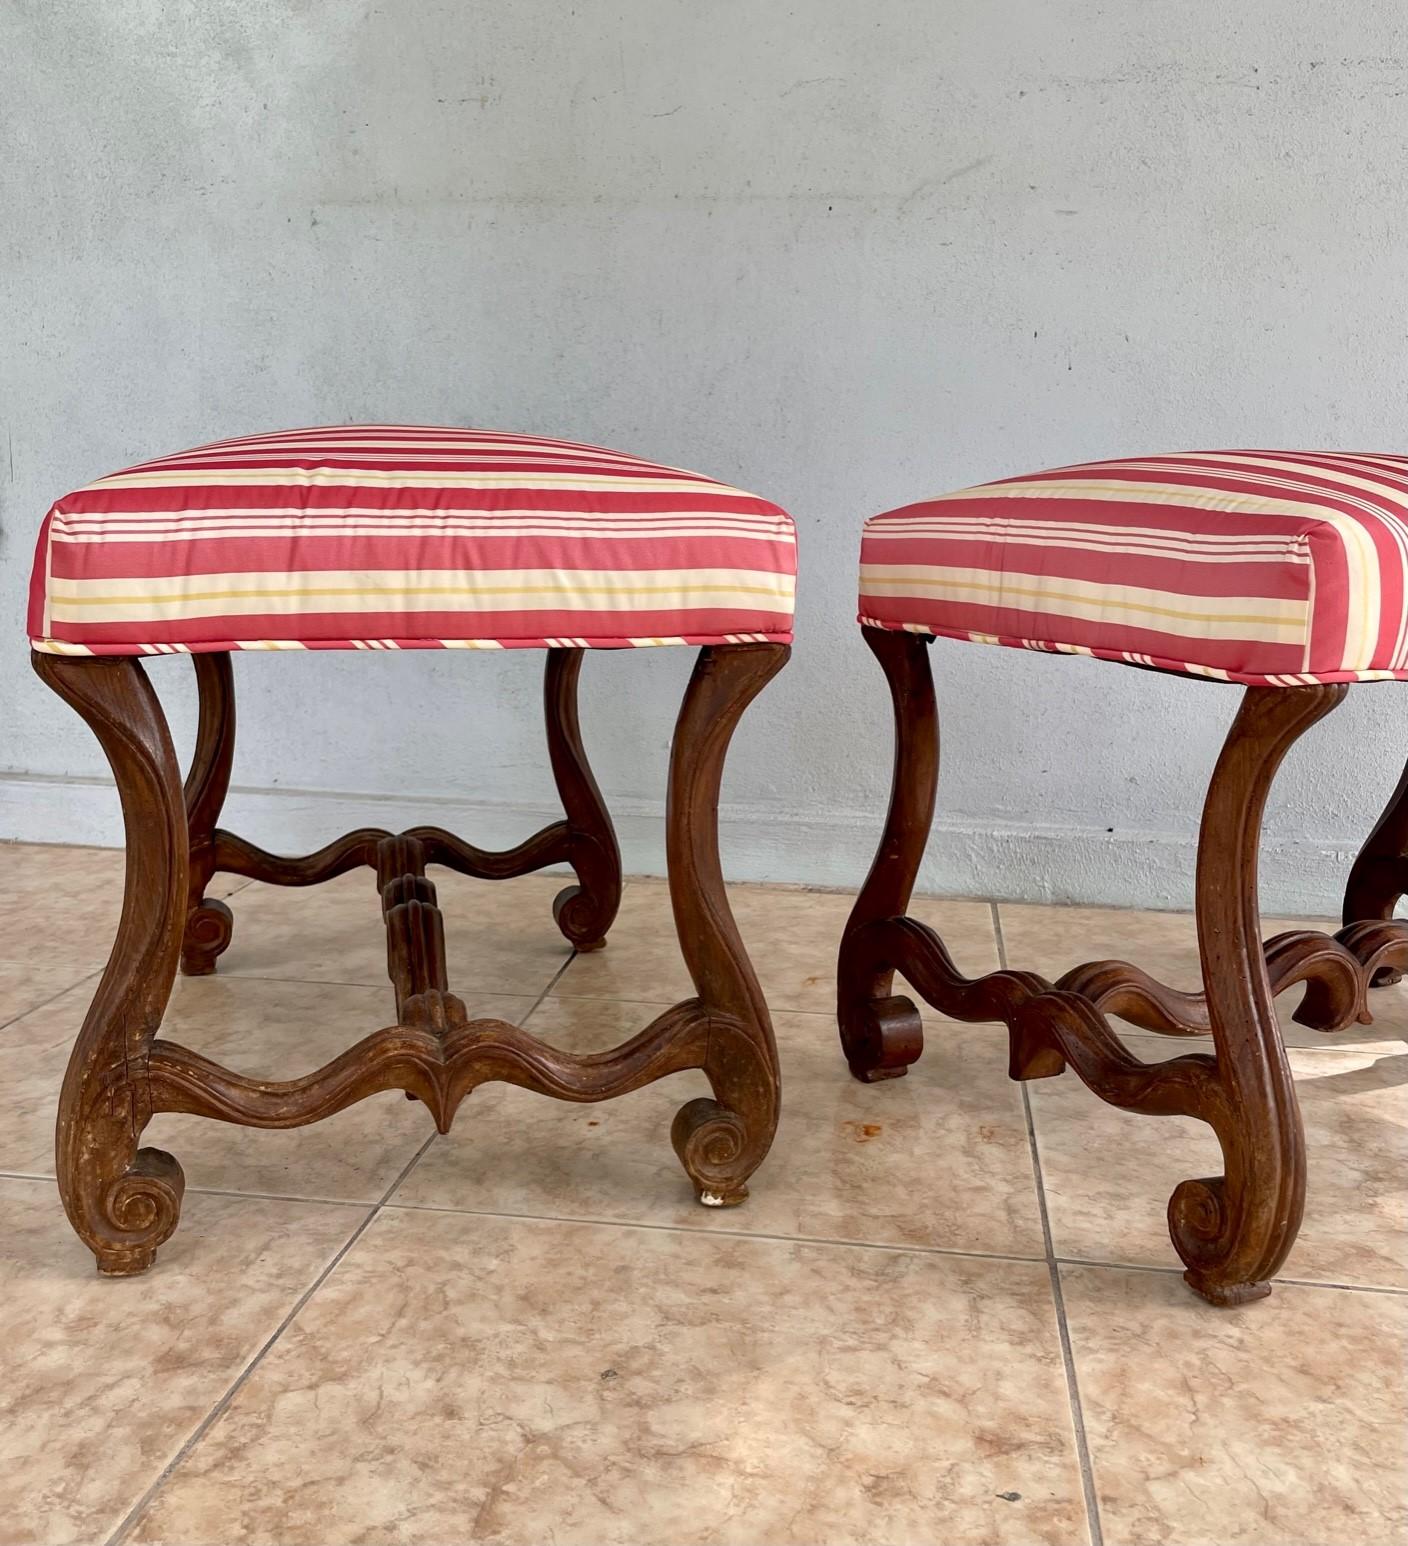 Pair French Louis XV Pouffe Os de Mouton Ottoman Tabouret 17th century.

Antique matched pair of 17th century French Baroque wood carved tabourets. The base was typically used for chair frames. The original ottoman was taken down to the frame and